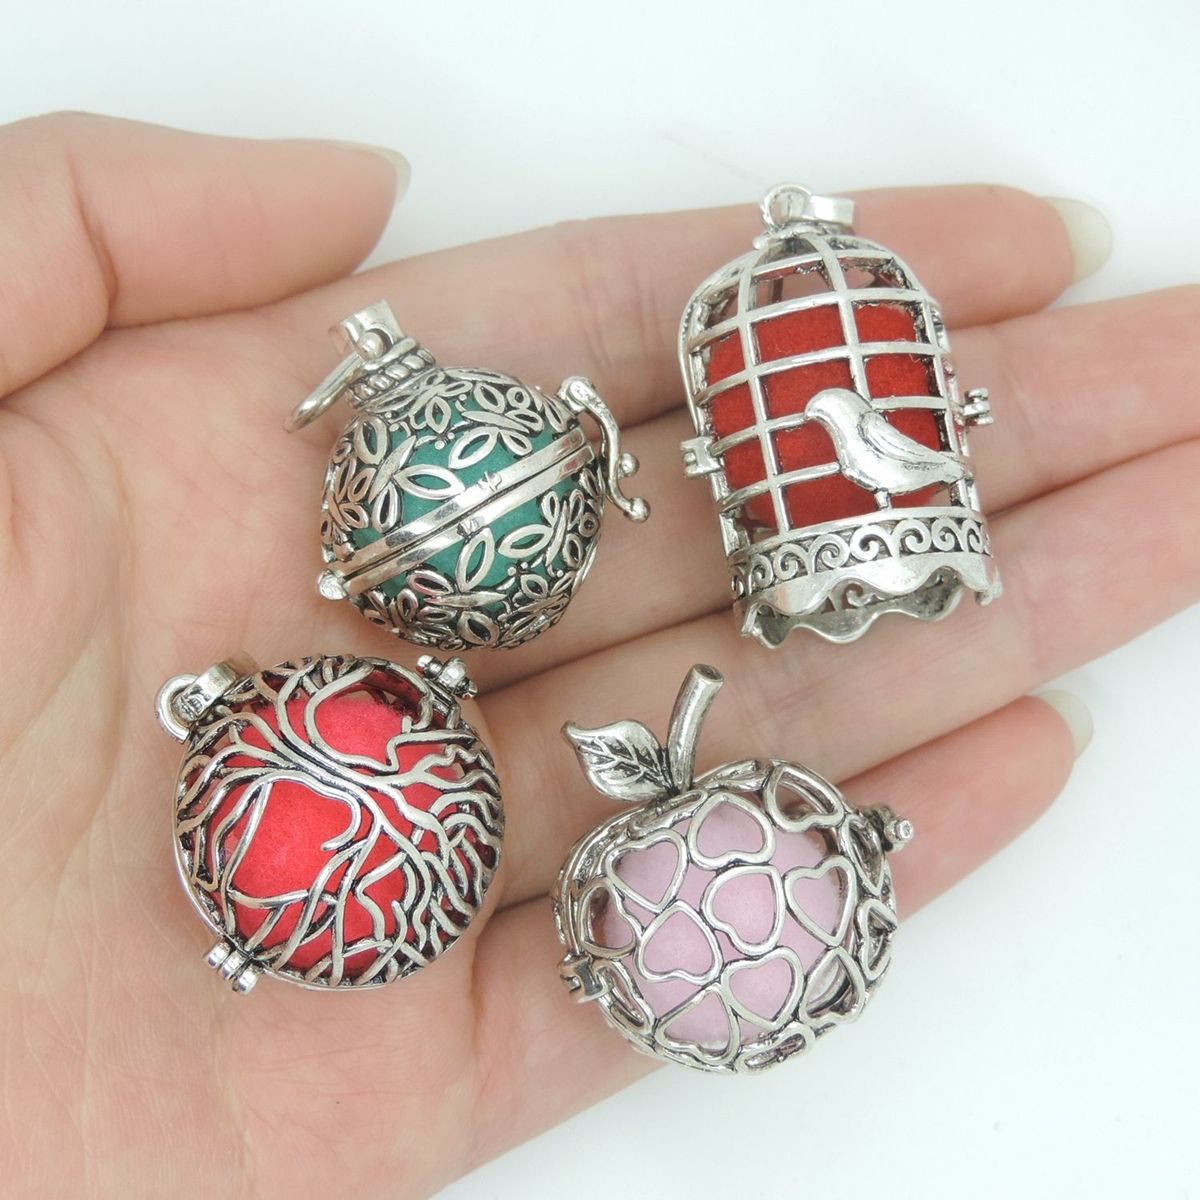 4X-Hollow-Perfume-Essential-Oils-Aromatherapy-Fragrance-Diffuser-Locket-Necklace-1628624